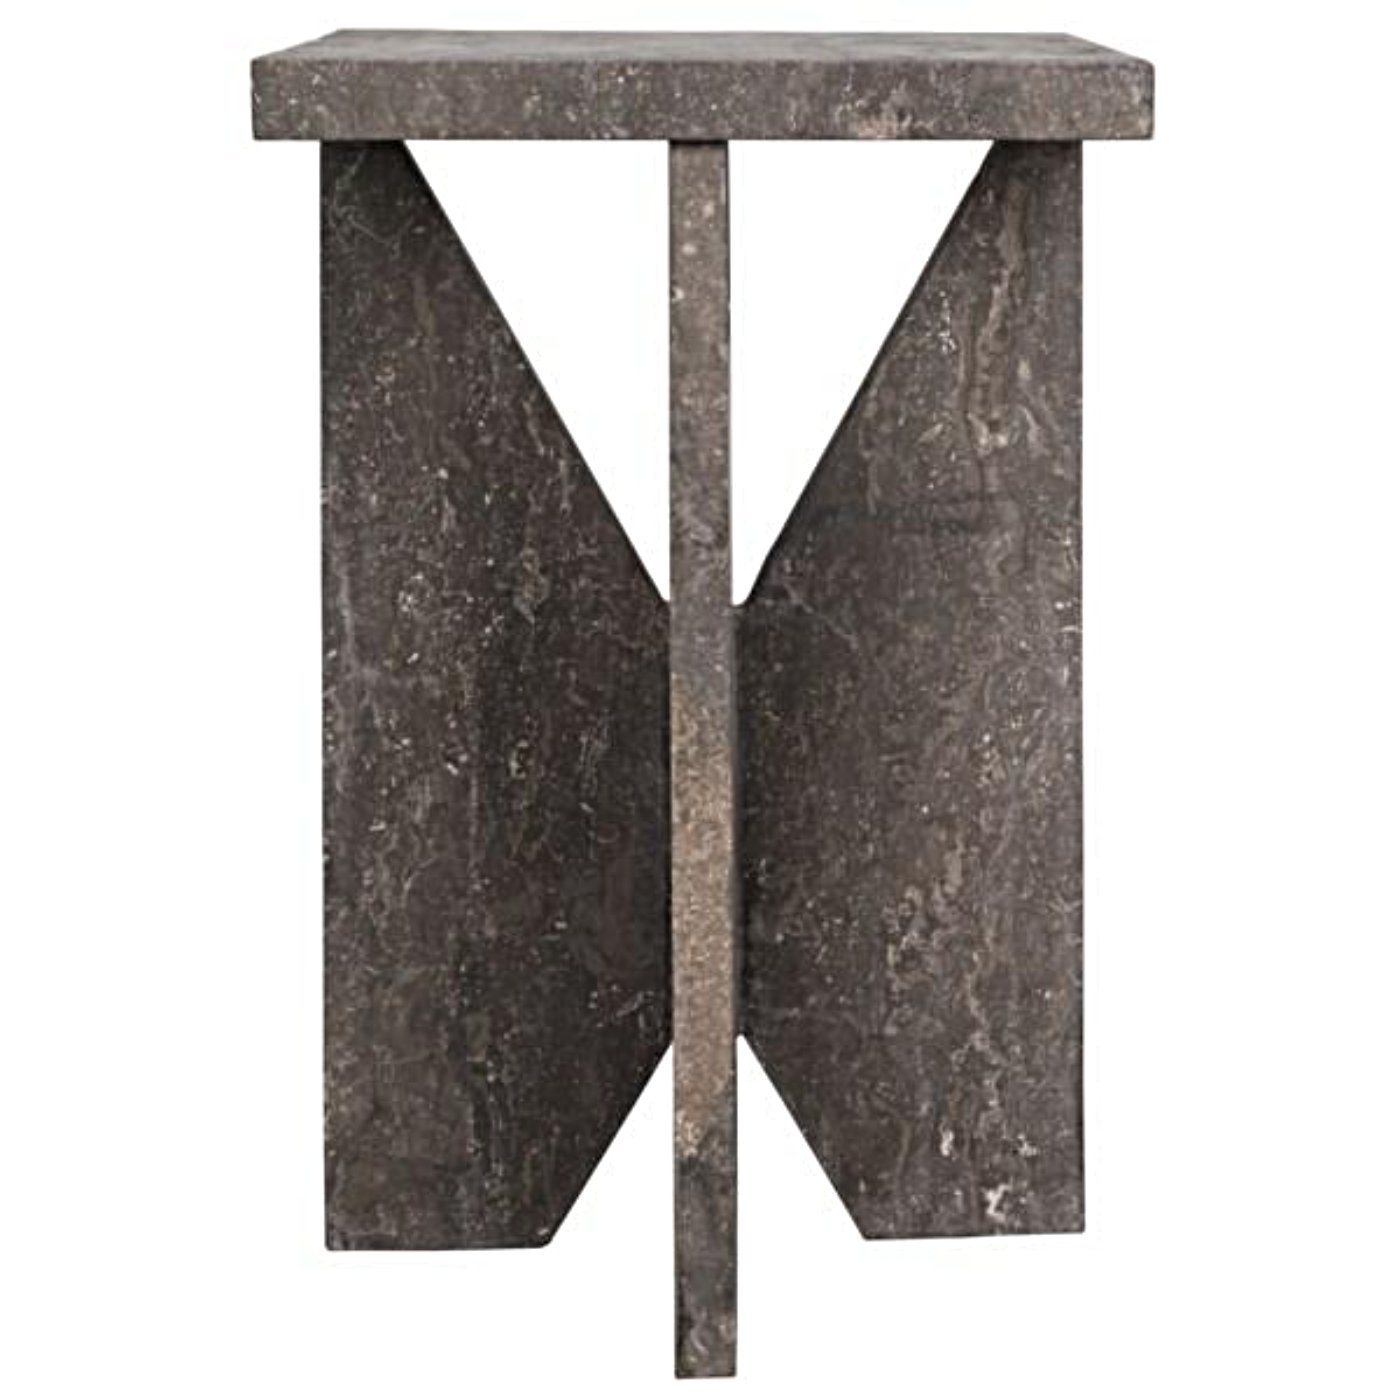 order luxury coffee tables and side global home accent table black marble angular trestle dining set furniture village outdoor chairs bunnings office depot concrete patio with